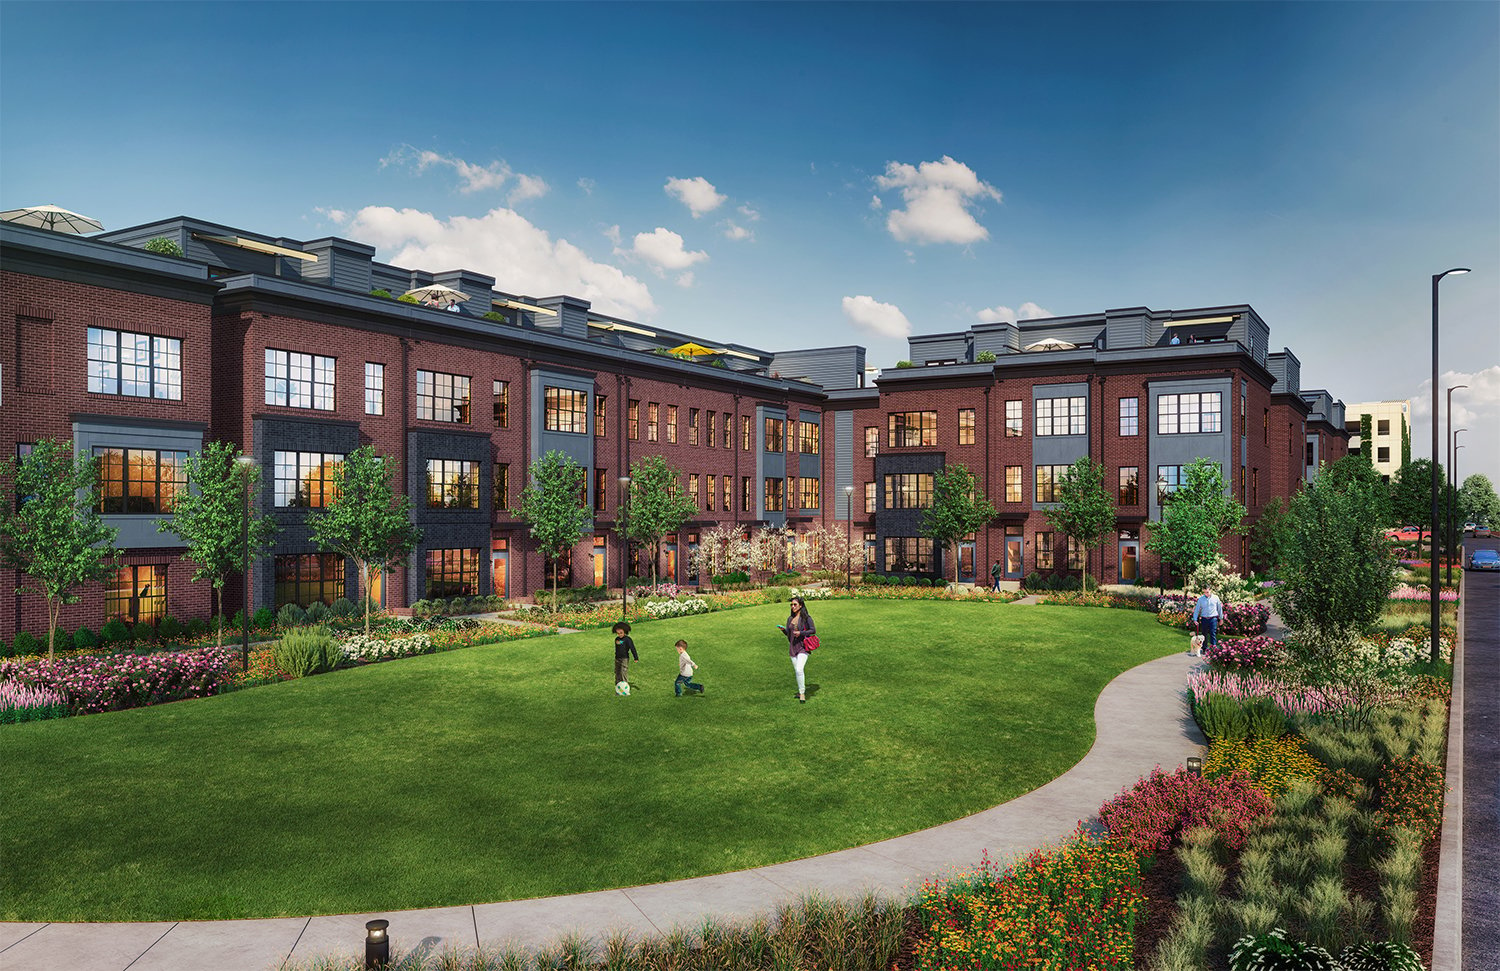 Get To Know The Townhomes at Reston Station